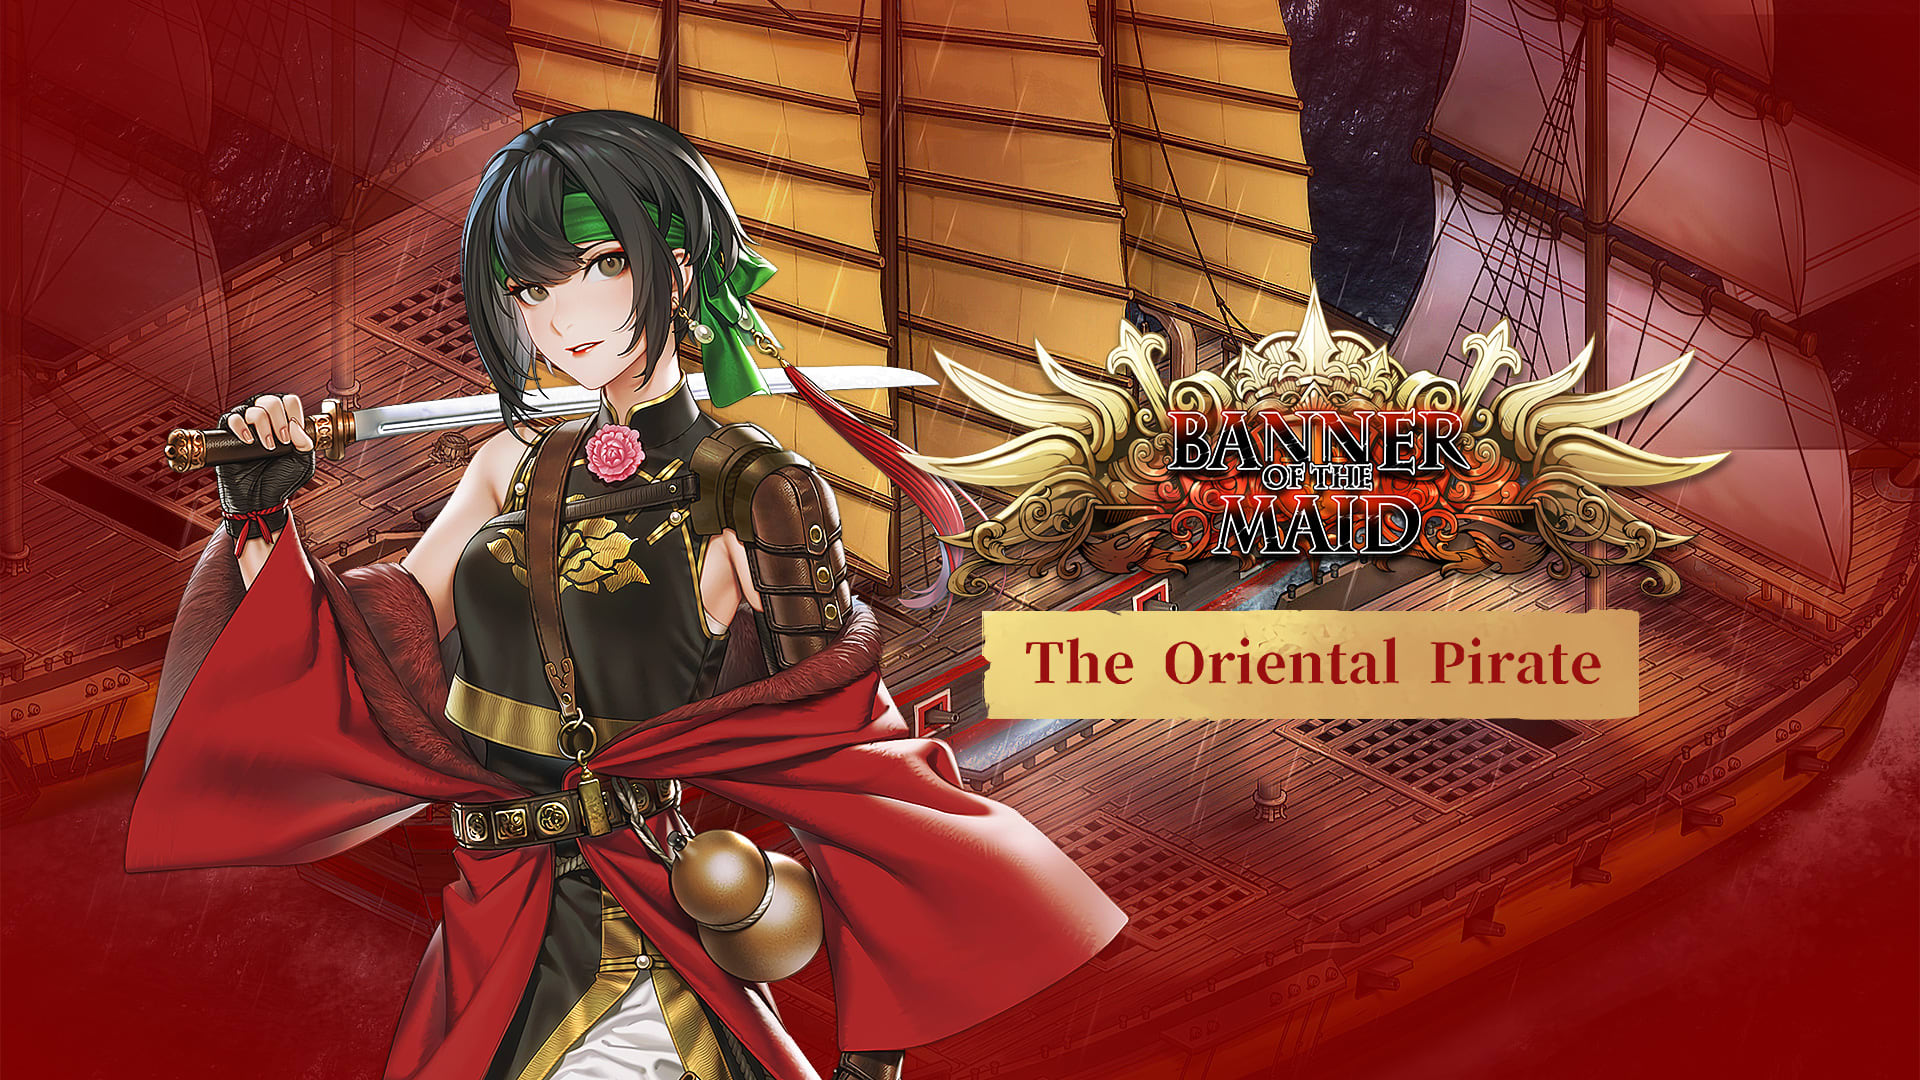 Banner of the Maid - The Oriental Pirate